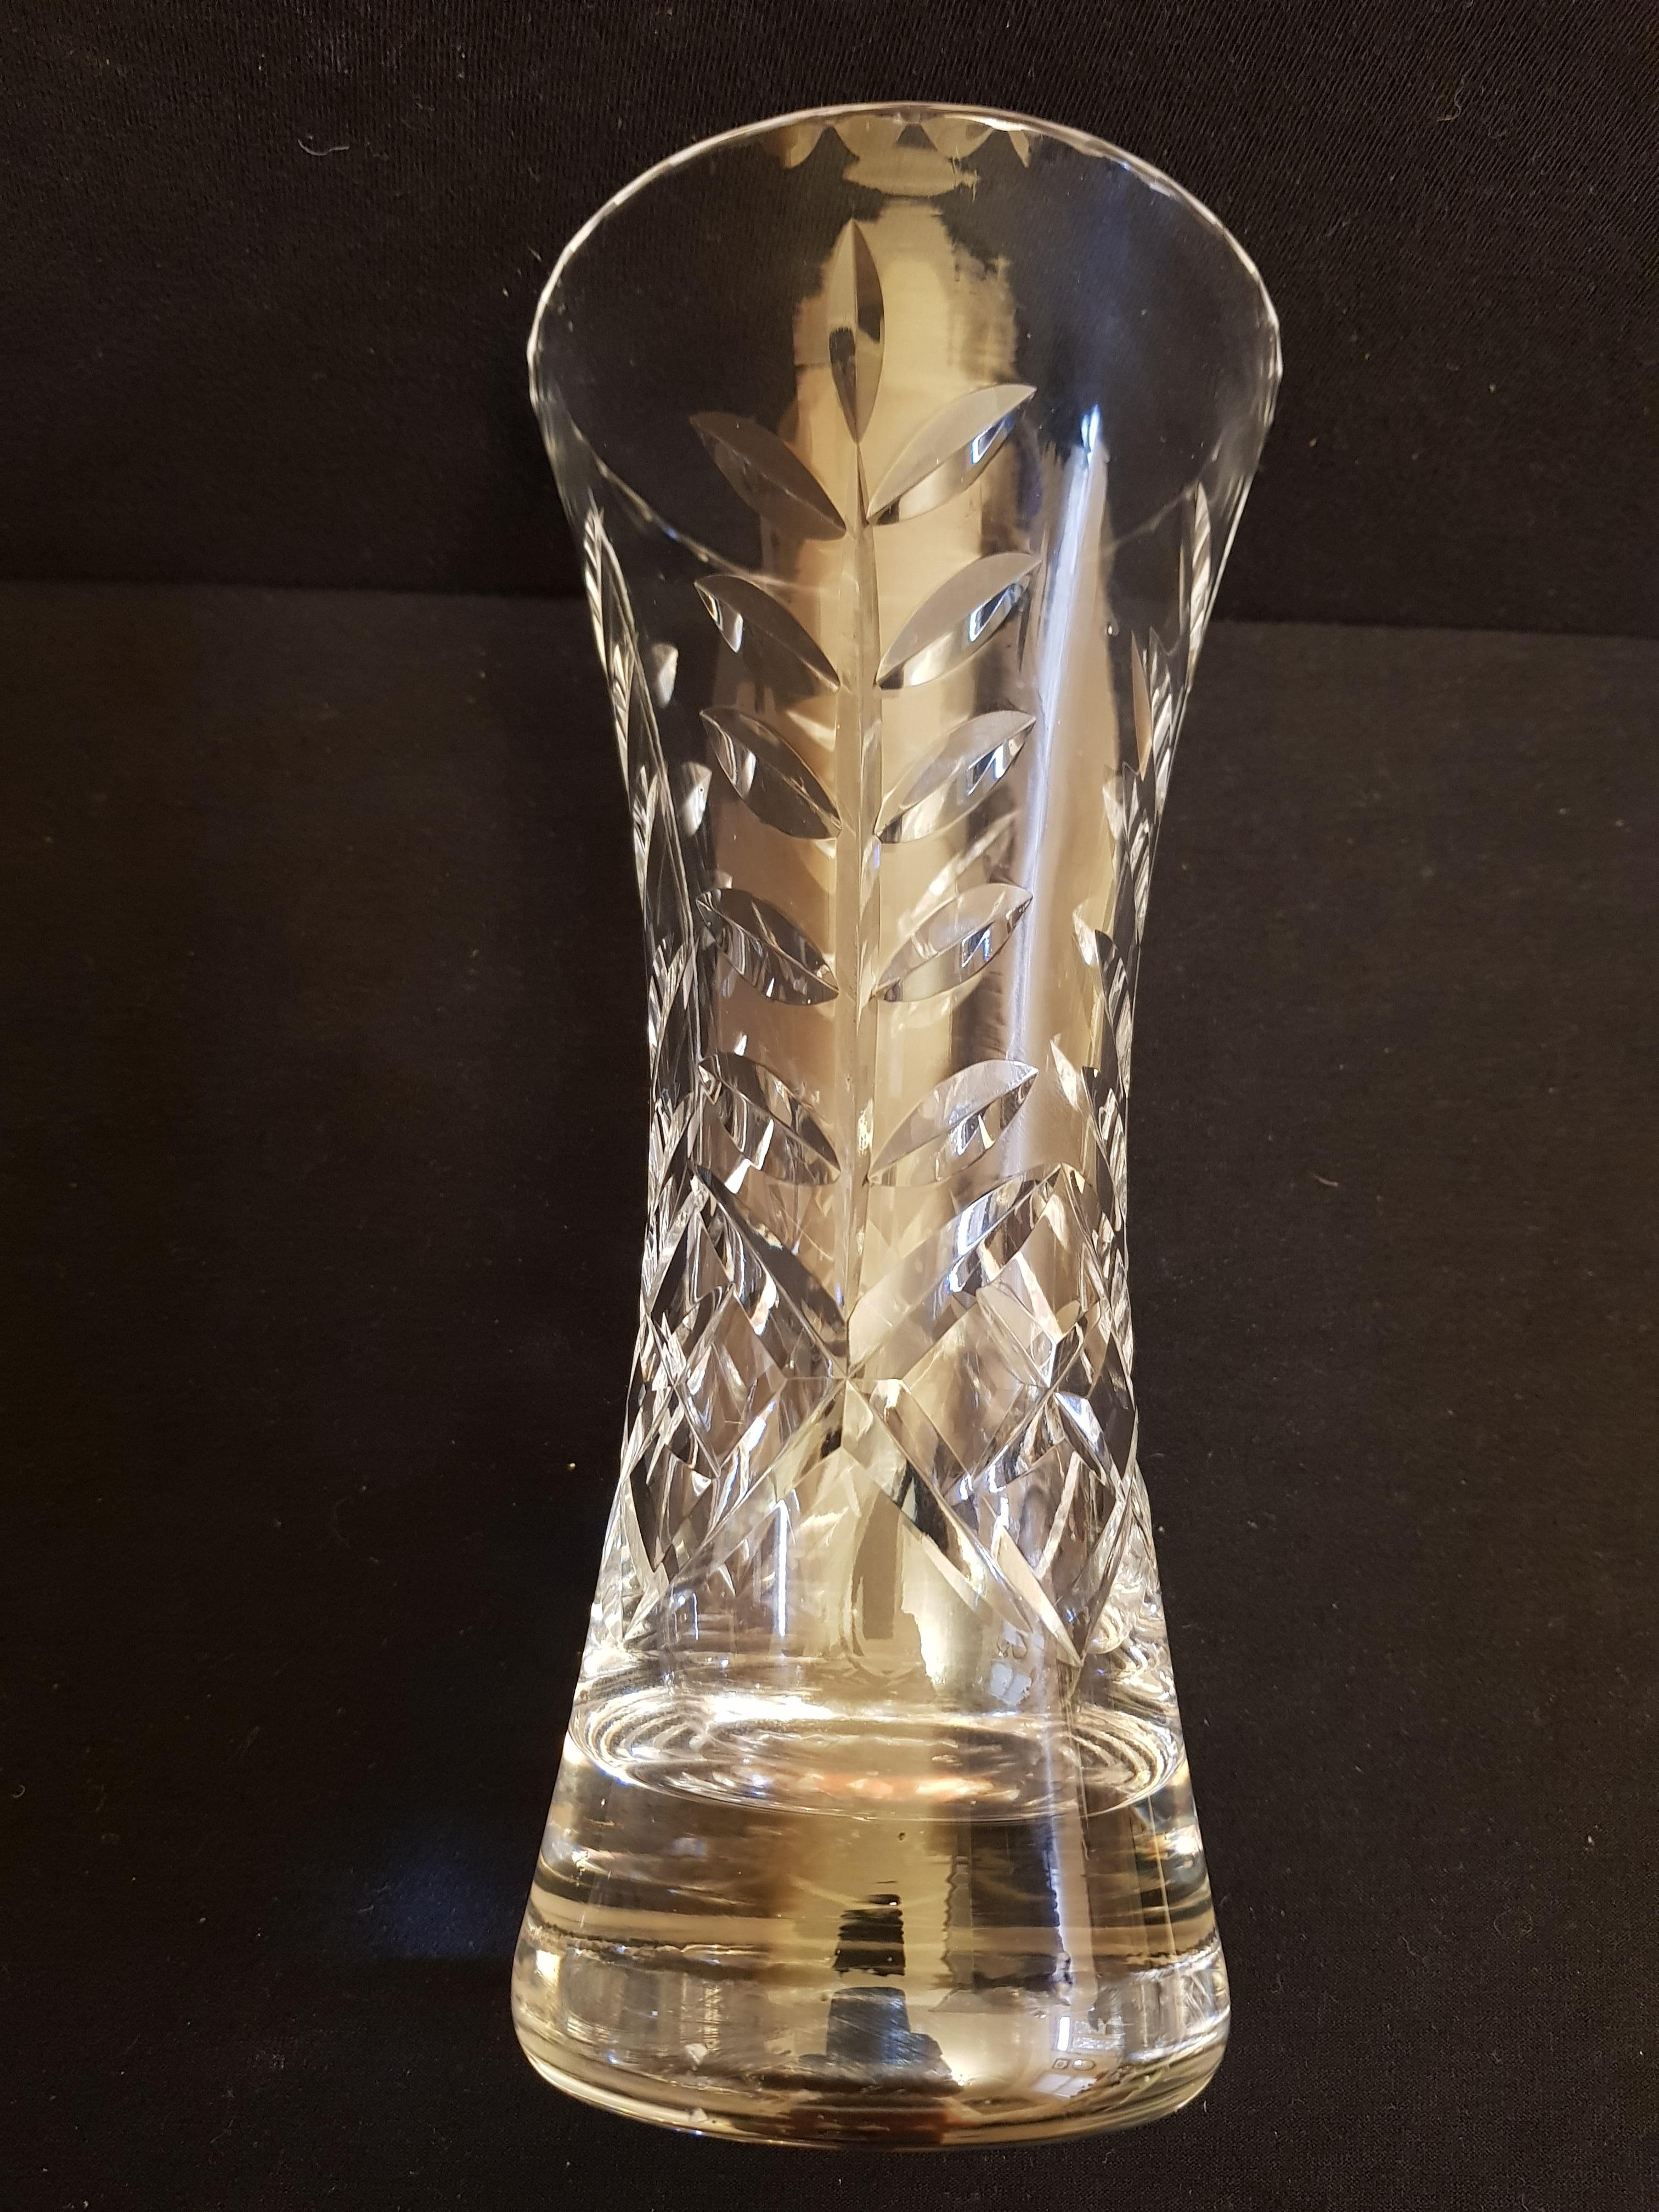 Vitange Hand Cut Crystal Vases In Excellent Condition For Sale In Grantham, GB